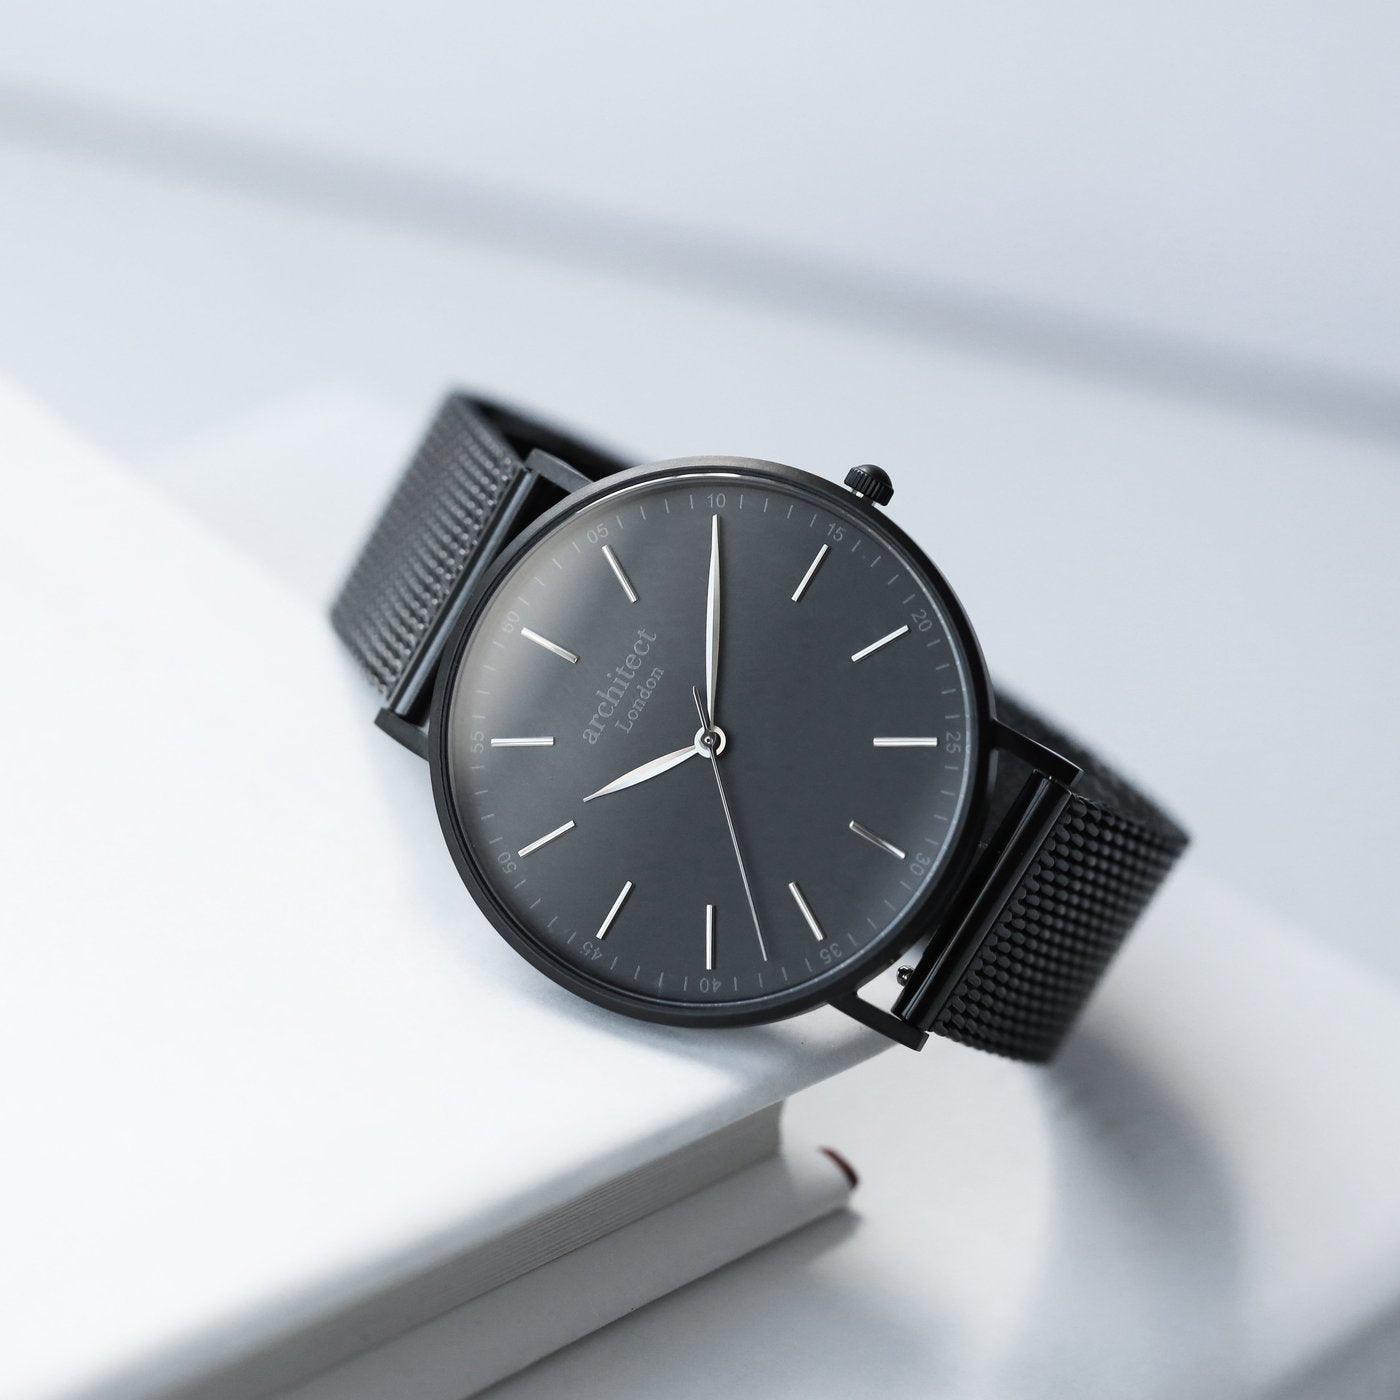 Handwriting Engraving Men's Minimalist Architect Watch With Pitch Black Mesh Strap - Shop Personalised Gifts